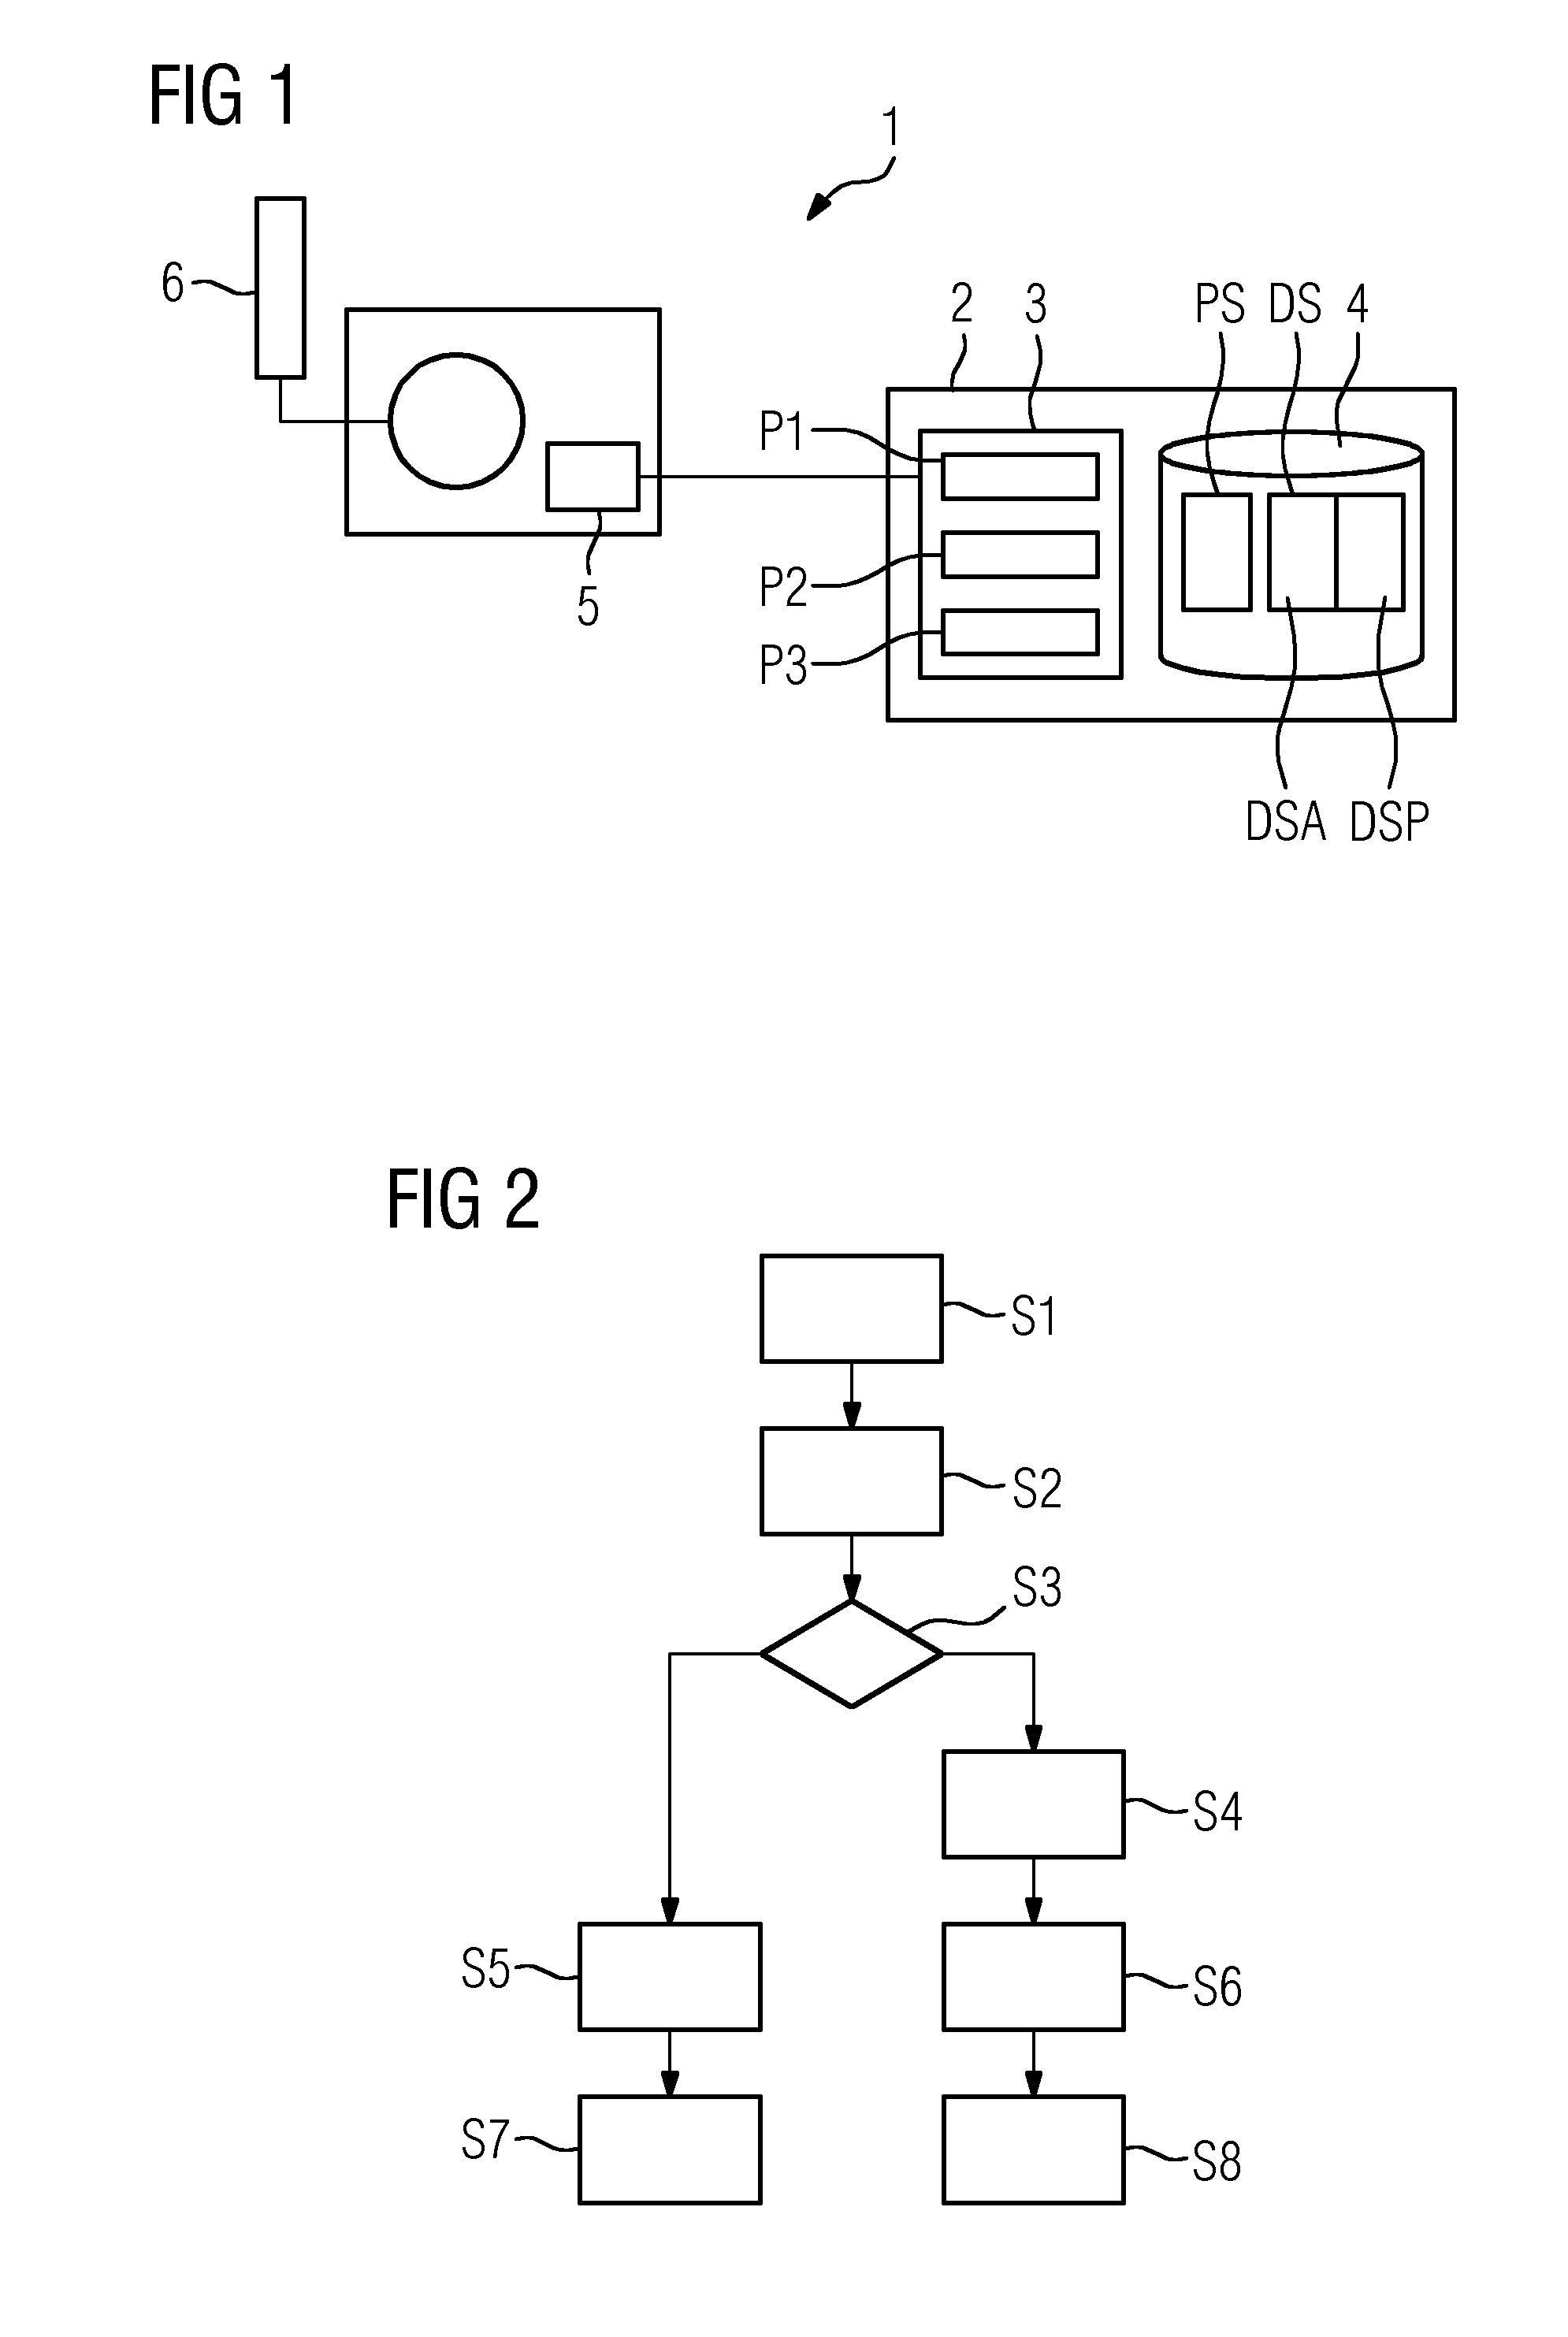 Method for operating an imaging diagnostic device and medical imaging system